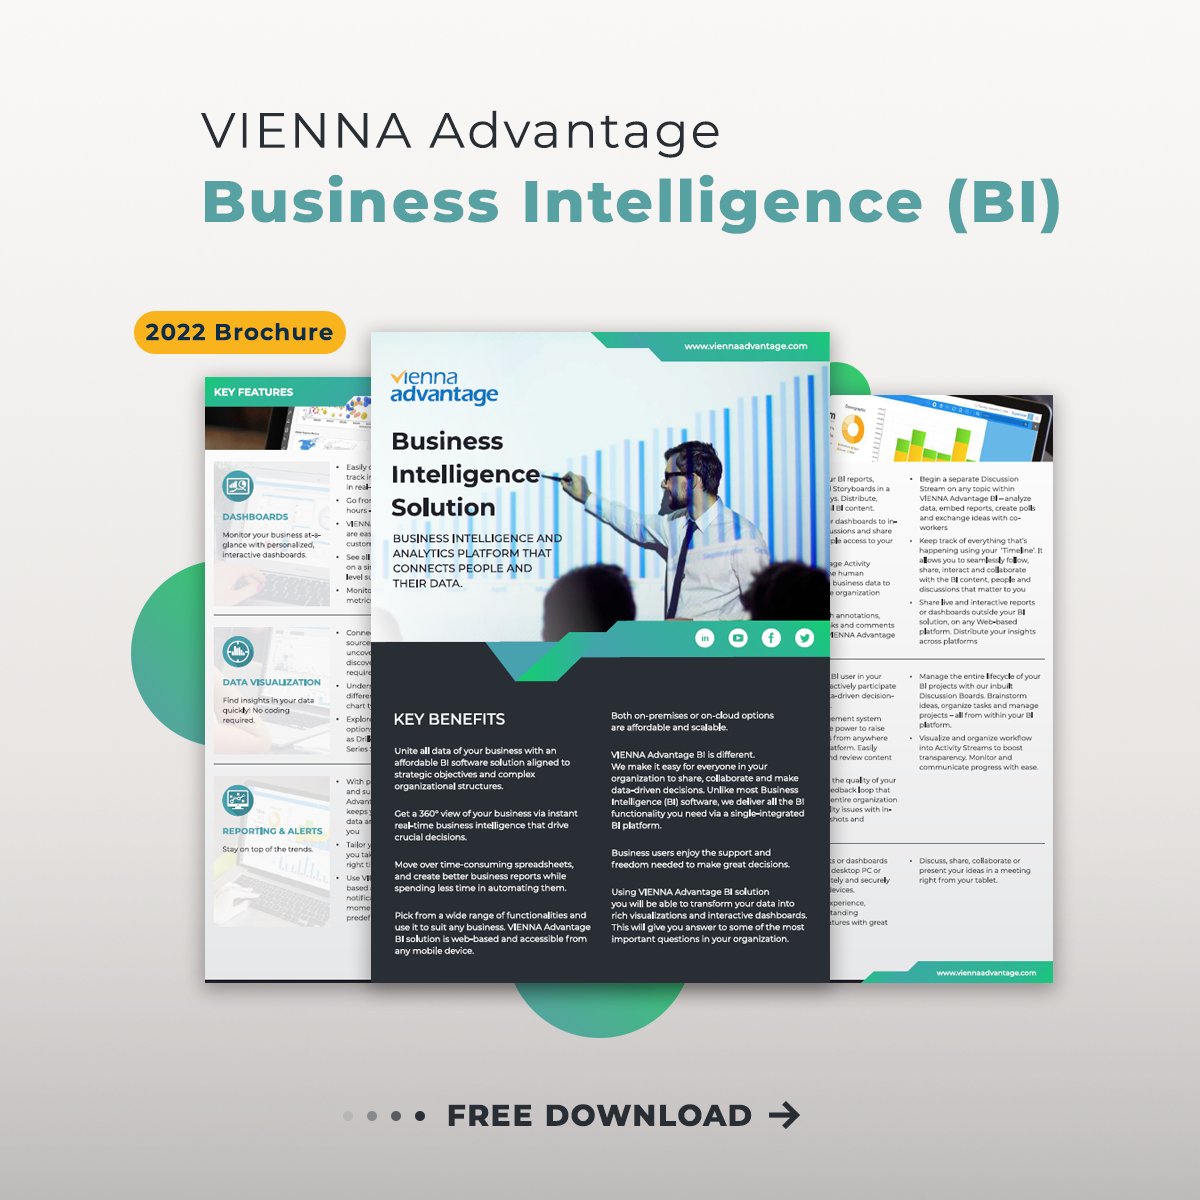 📢 NEWS 📢
Our latest #BusinessIntelligence brochure is now available for download! Get it here ➡️ bit.ly/3DLkF5s

#enterpriseanalytics #businessanalytics